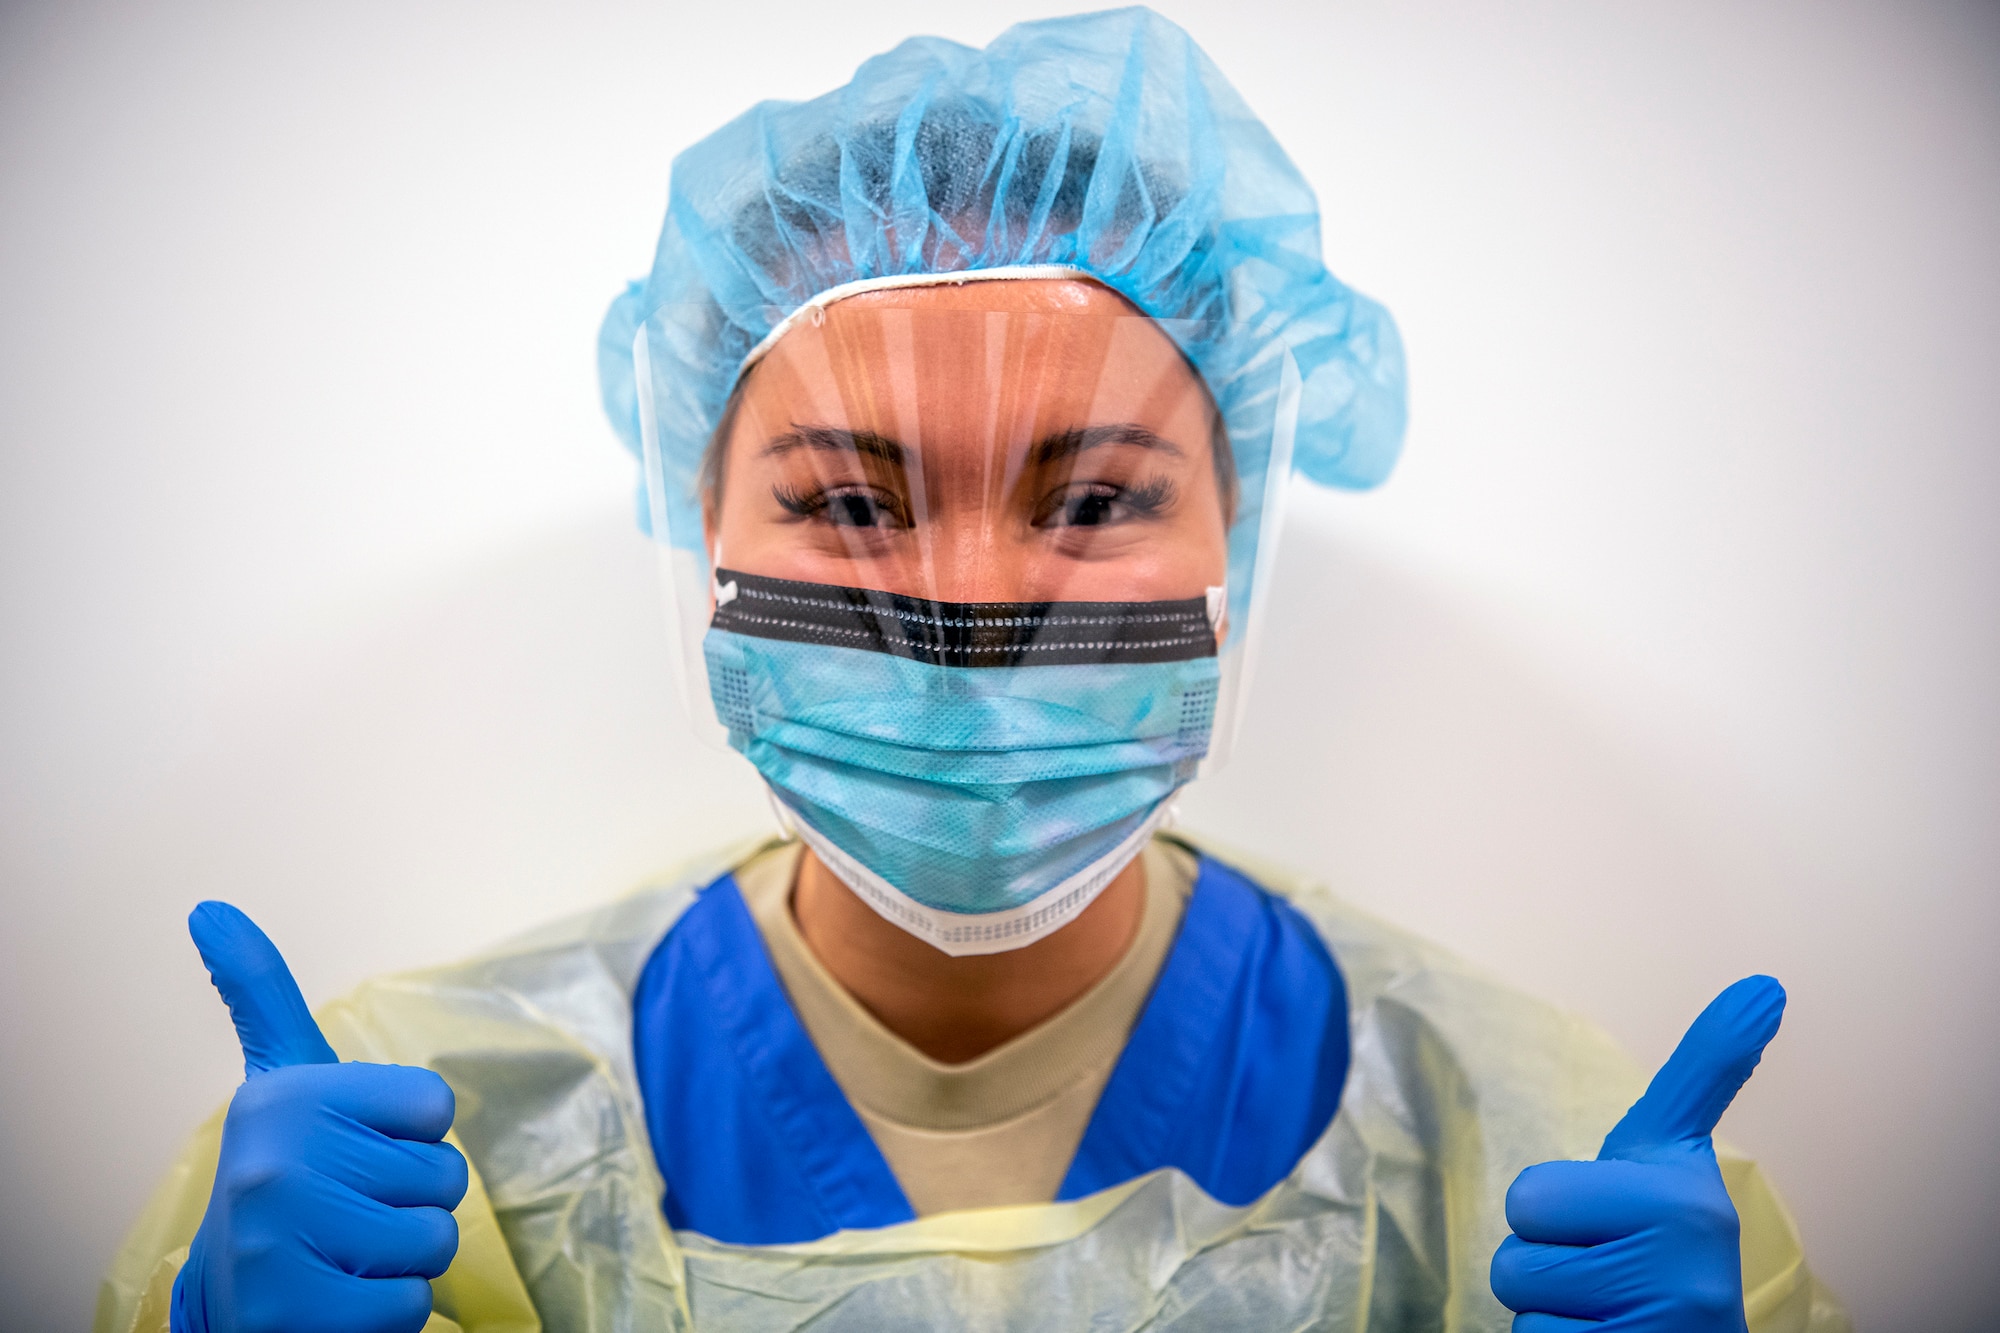 U.S. Air Force Senior Airman Amber Potter, 423d Medical Squadron dental assistant, poses for a portrait  at RAF Alconbury, England, April 14, 2020. In an effort to control the COVID-19 pandemic, the 423d MDS has been conducting drive-thru COVID-19 testing along with passing out face coverings to those in need. (U.S. Air Force photo by Senior Airman Eugene Oliver)